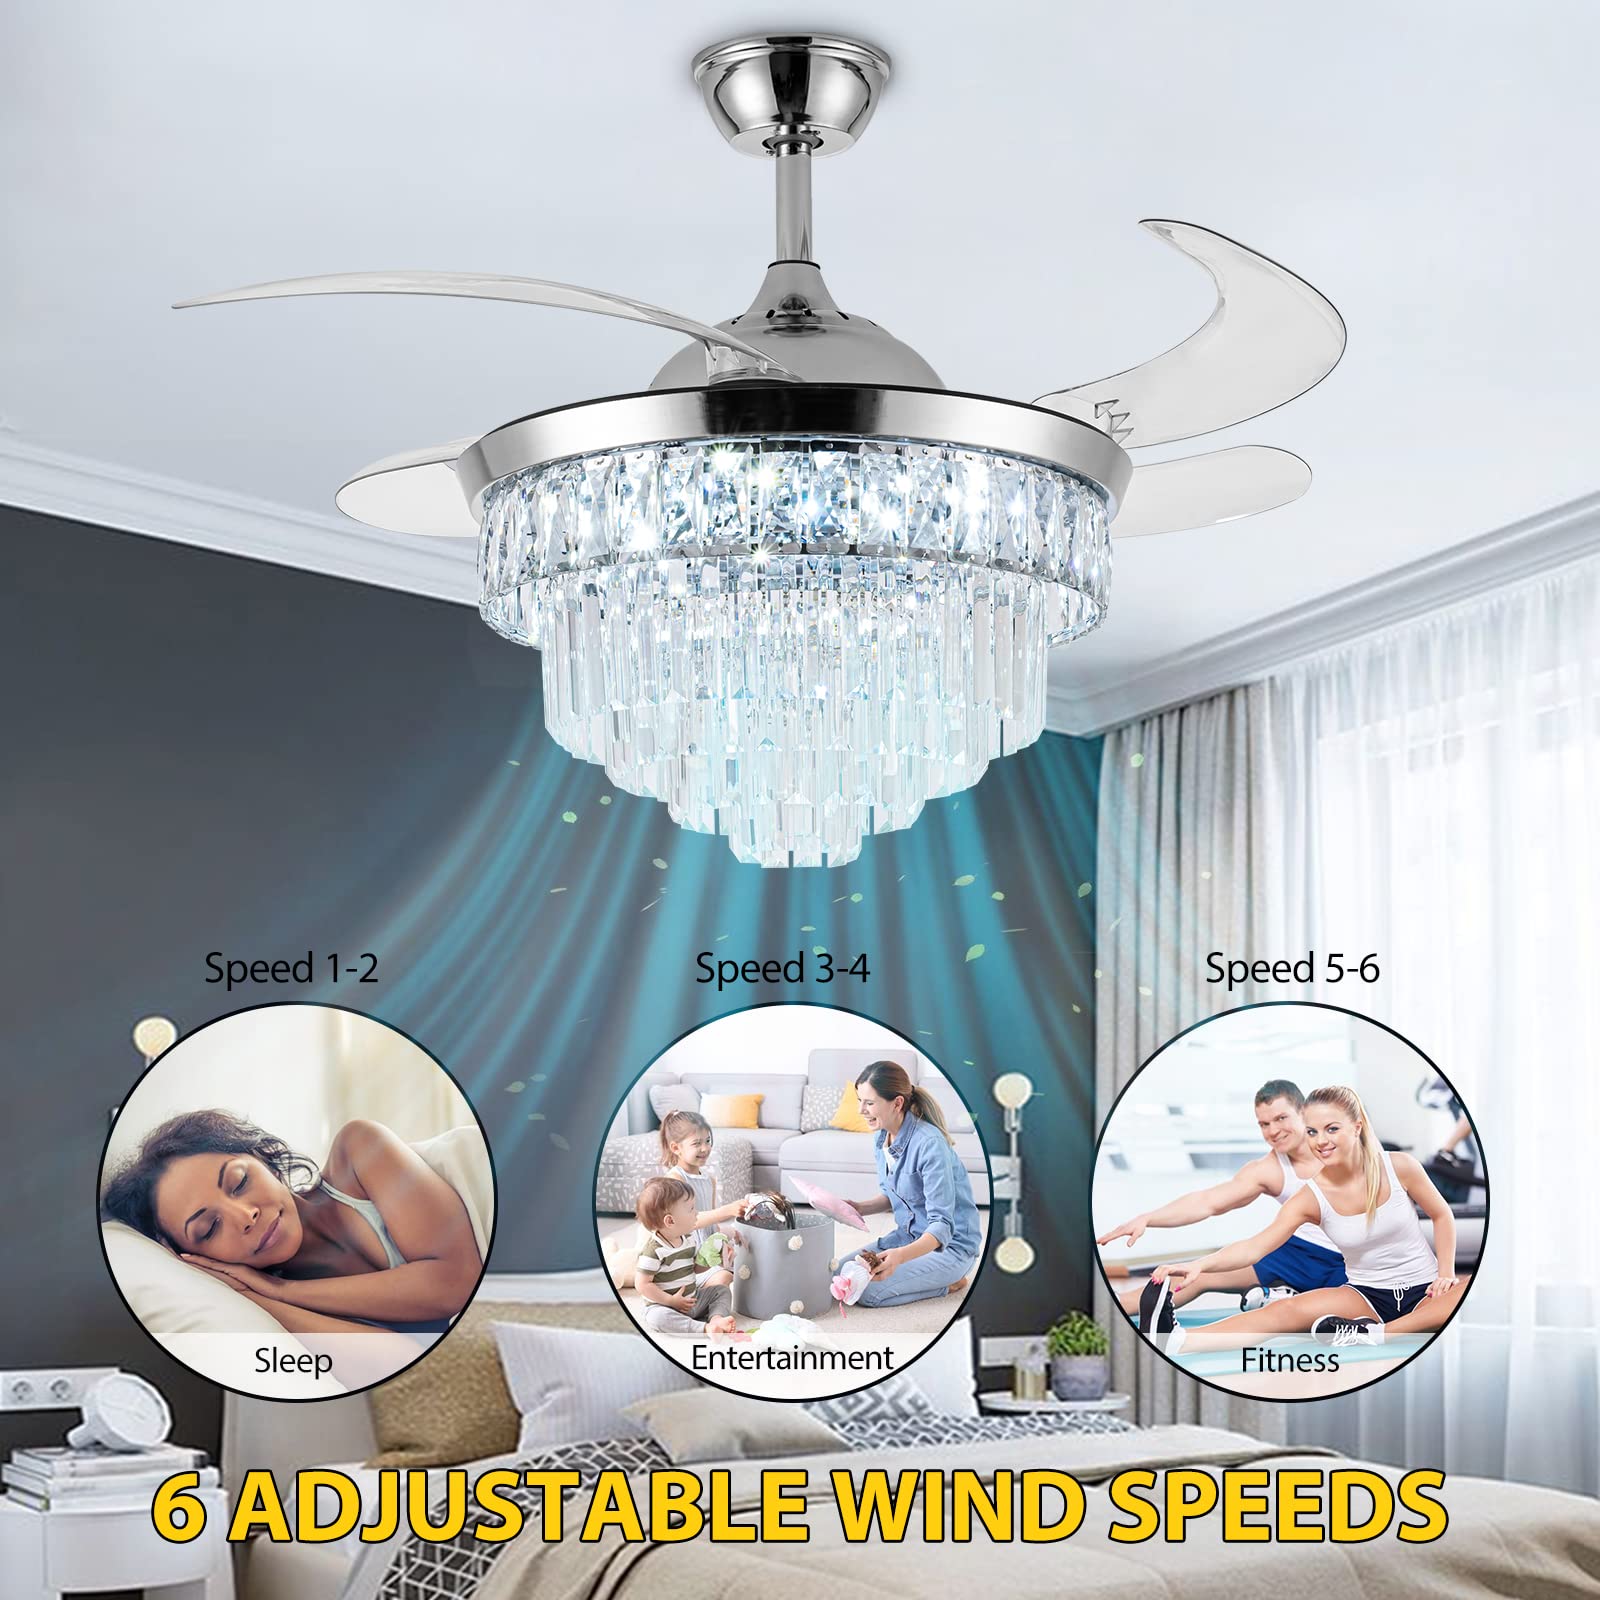 SHINLEYPACK Crystal Ceiling Fan with Light,42 Inch Dimmable Crystal Fandelier, Modern Retractable Ceiling Fan 6 Speeds Indoor Chandelier Fan for Bedroom Living Room Dining Room